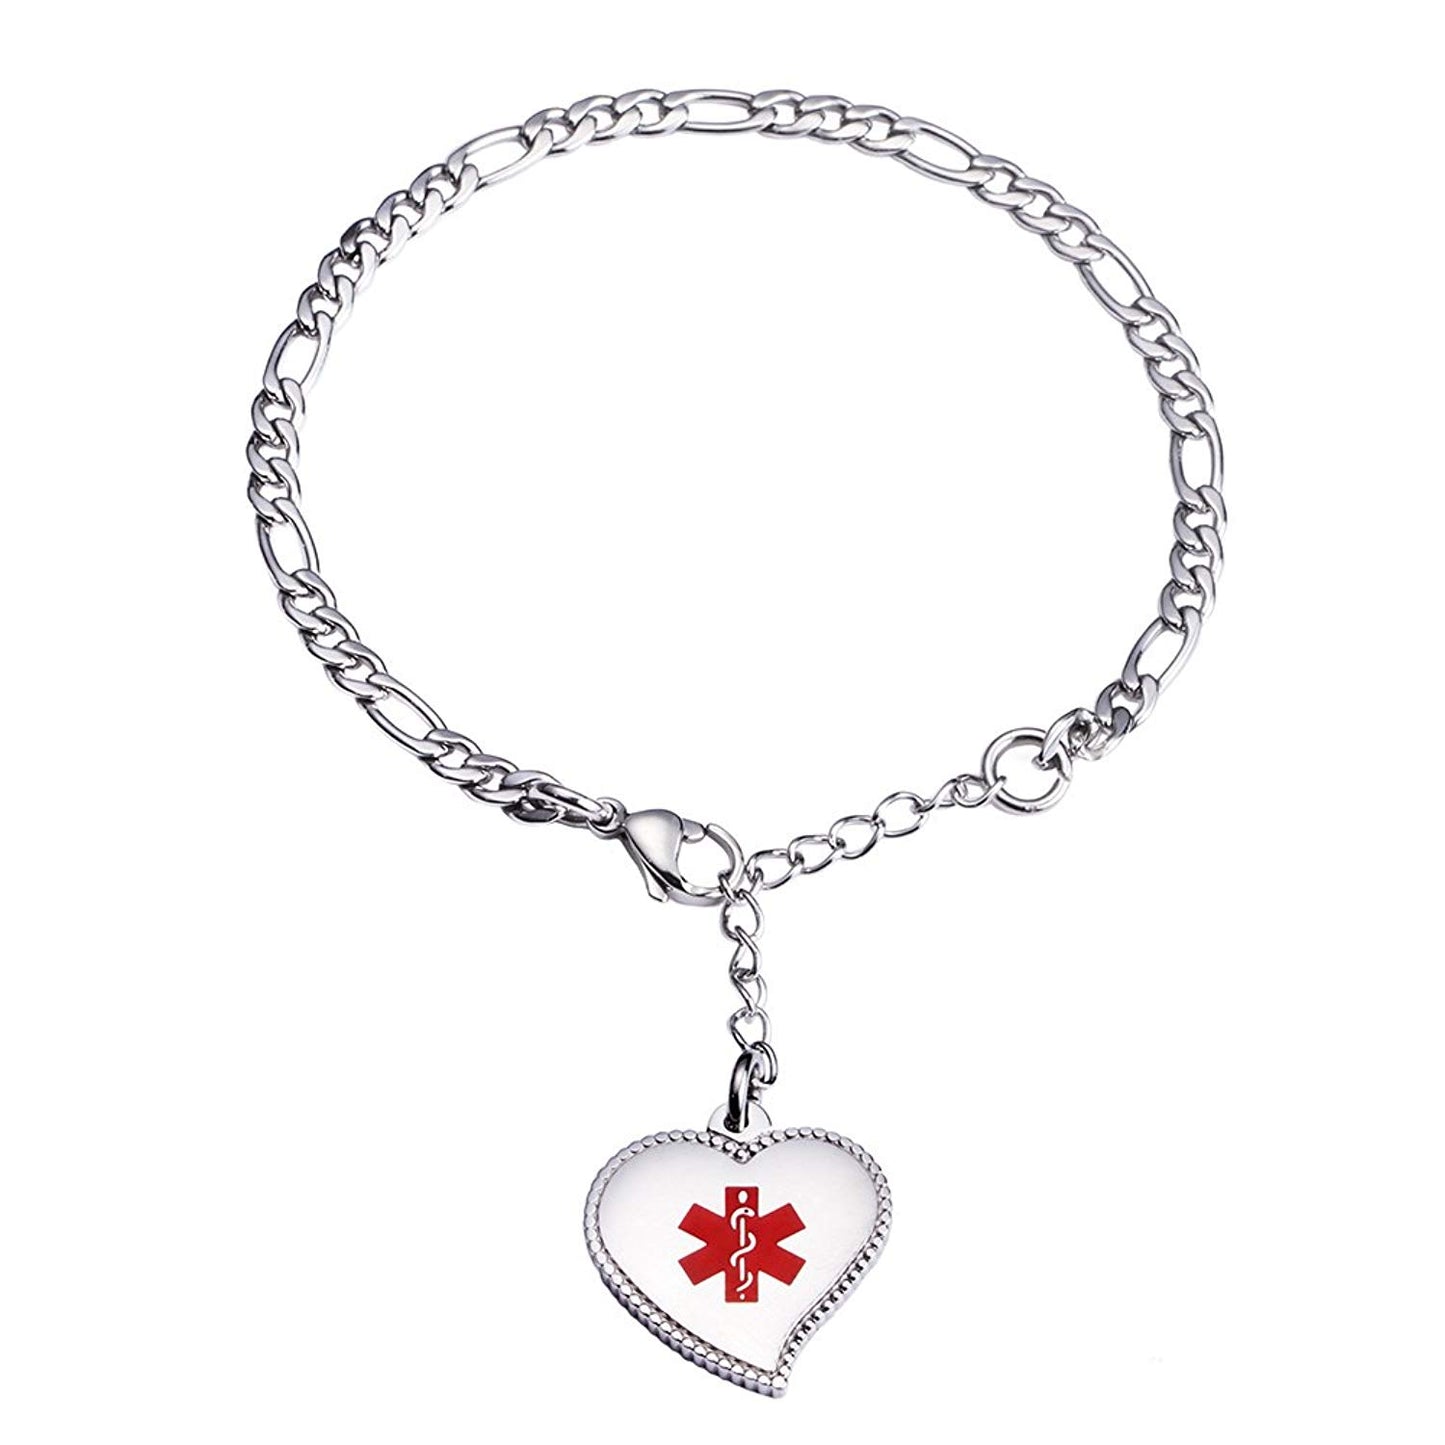 Fashion Mini Figaro chain with Heart charm medical id bracelet for women